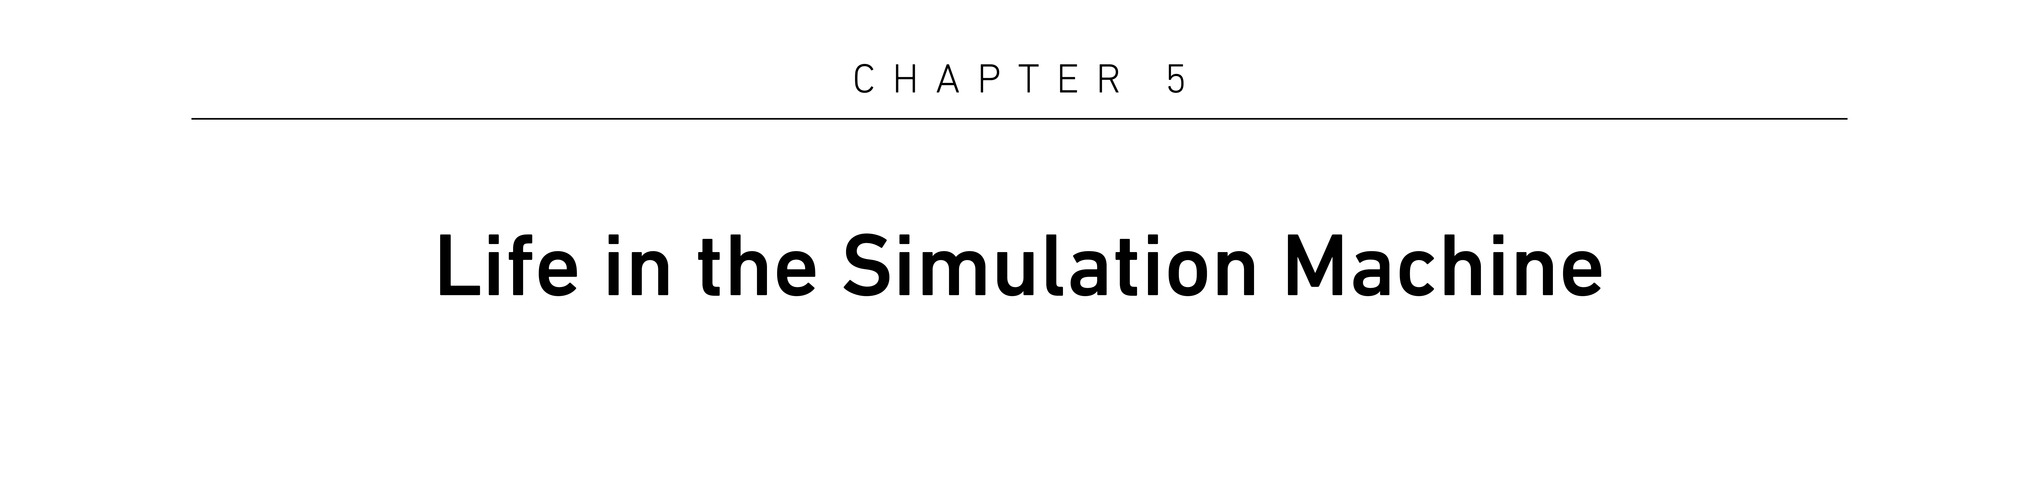 Chapter 5 Life in the Simulation Machine